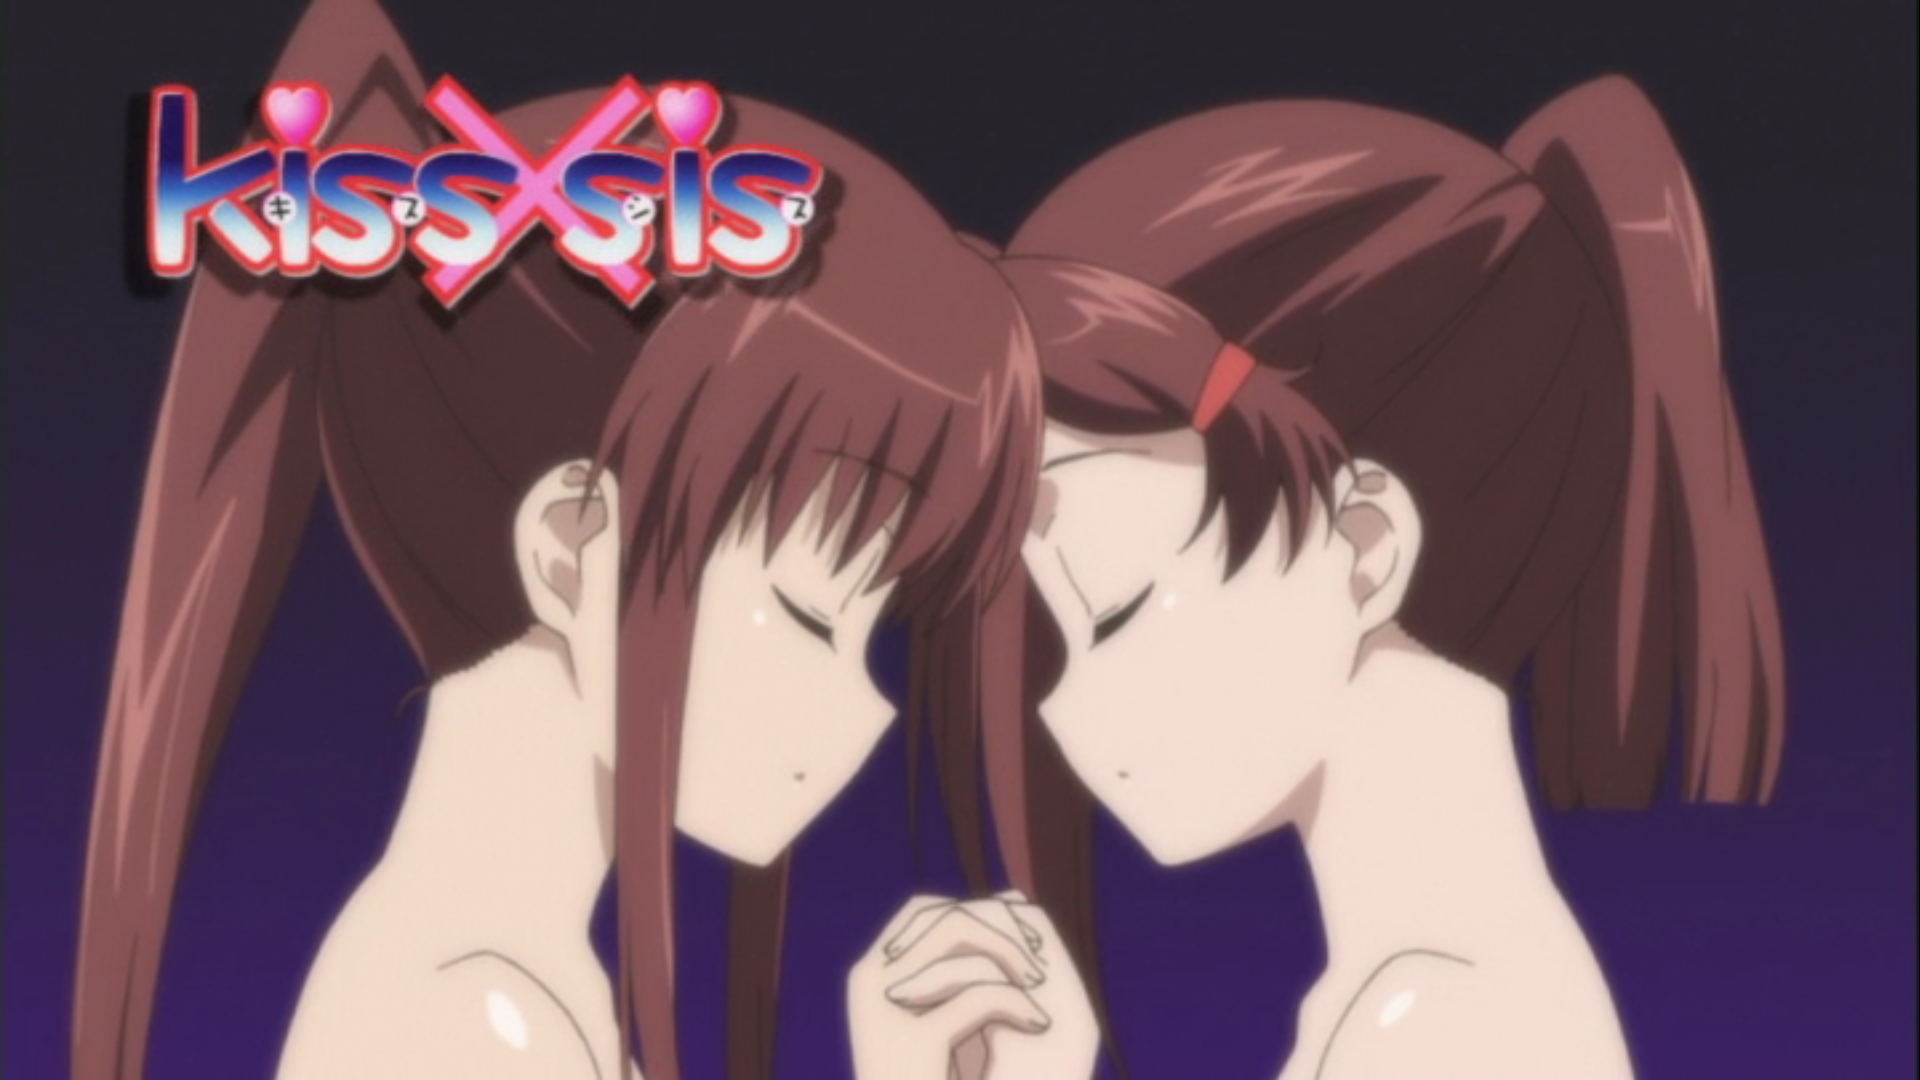 Kiss Sis Wallpapers Anime Hq Kiss Sis Pictures 4k Wallpapers 19